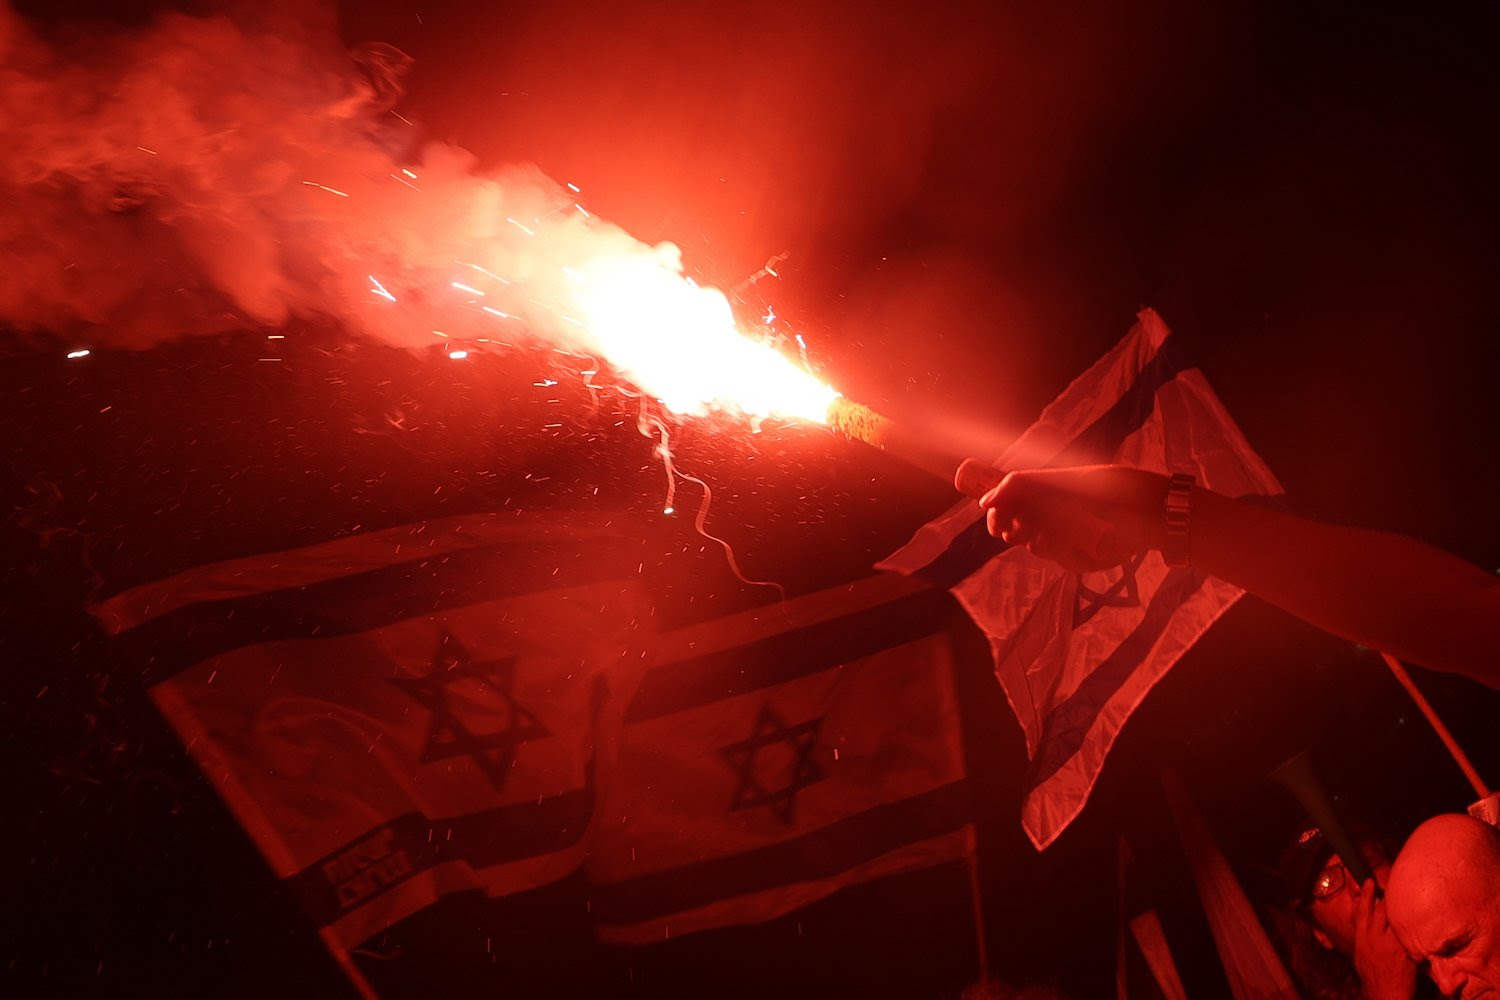 A protester carries a flare during a demonstration against the Israeli government's judicial reform plan in Tel Aviv on July 27.